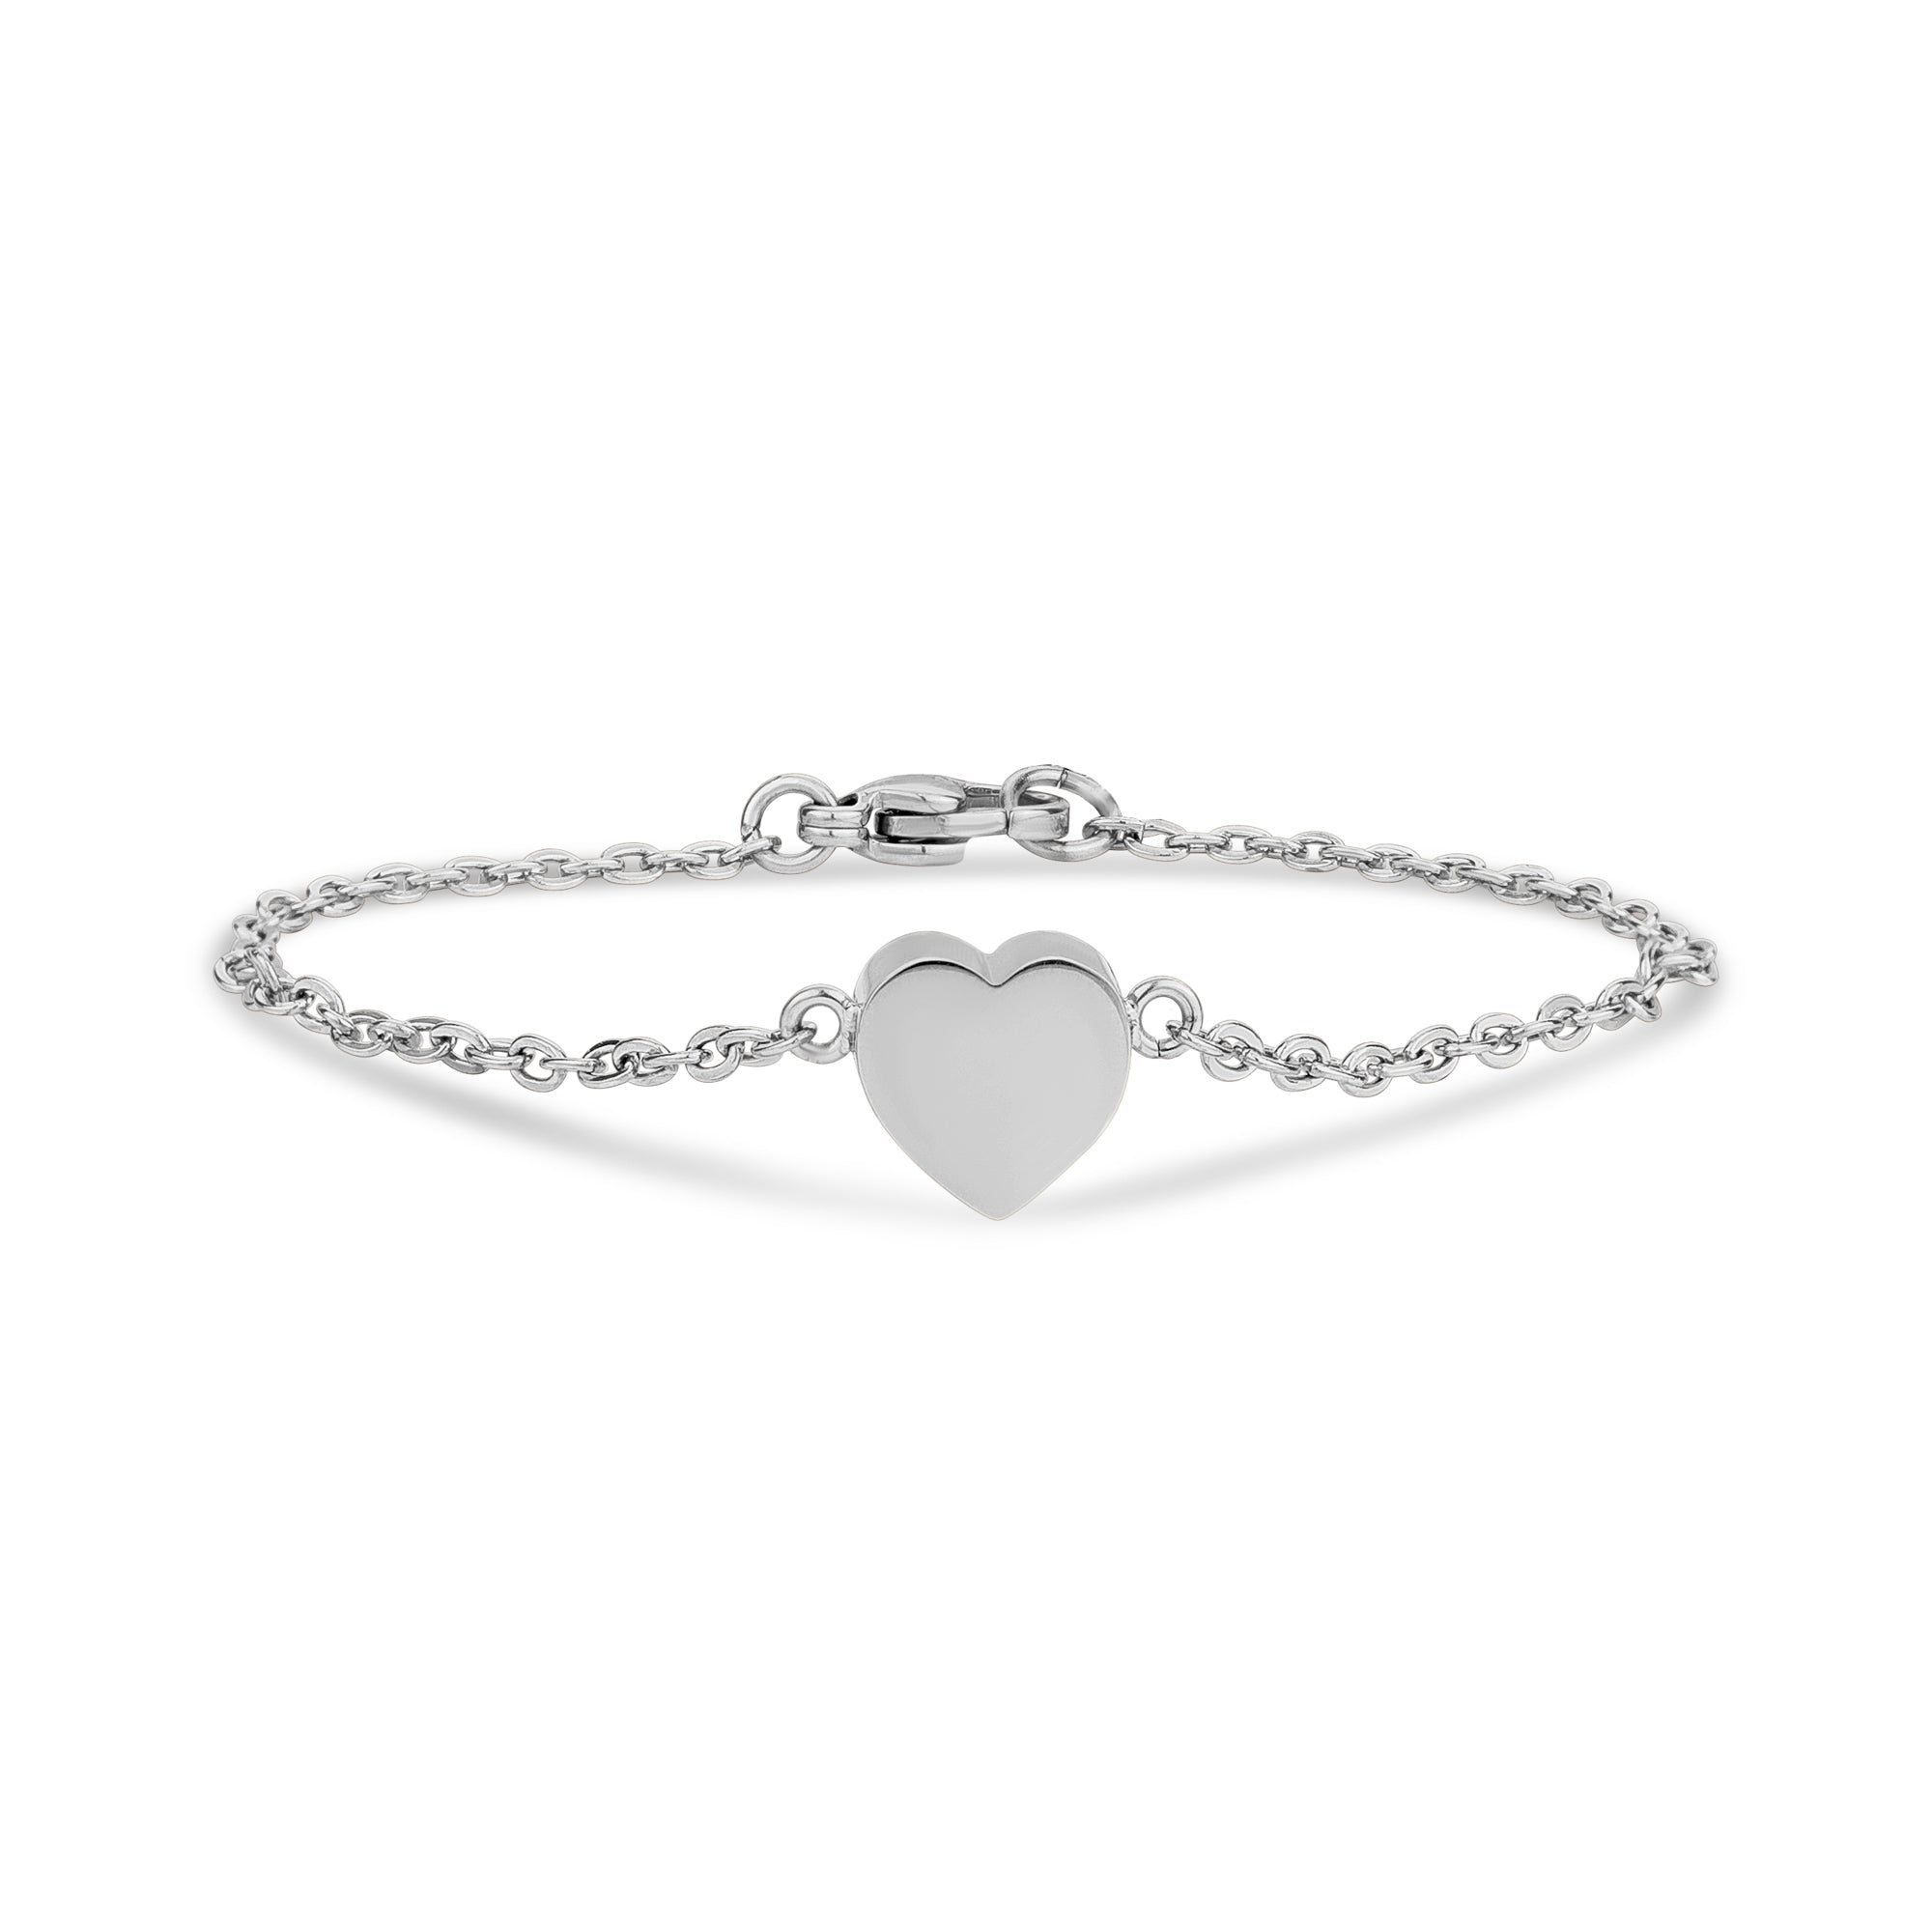 Ashes Charm - The Full Heart - LOVE IN A JEWEL®